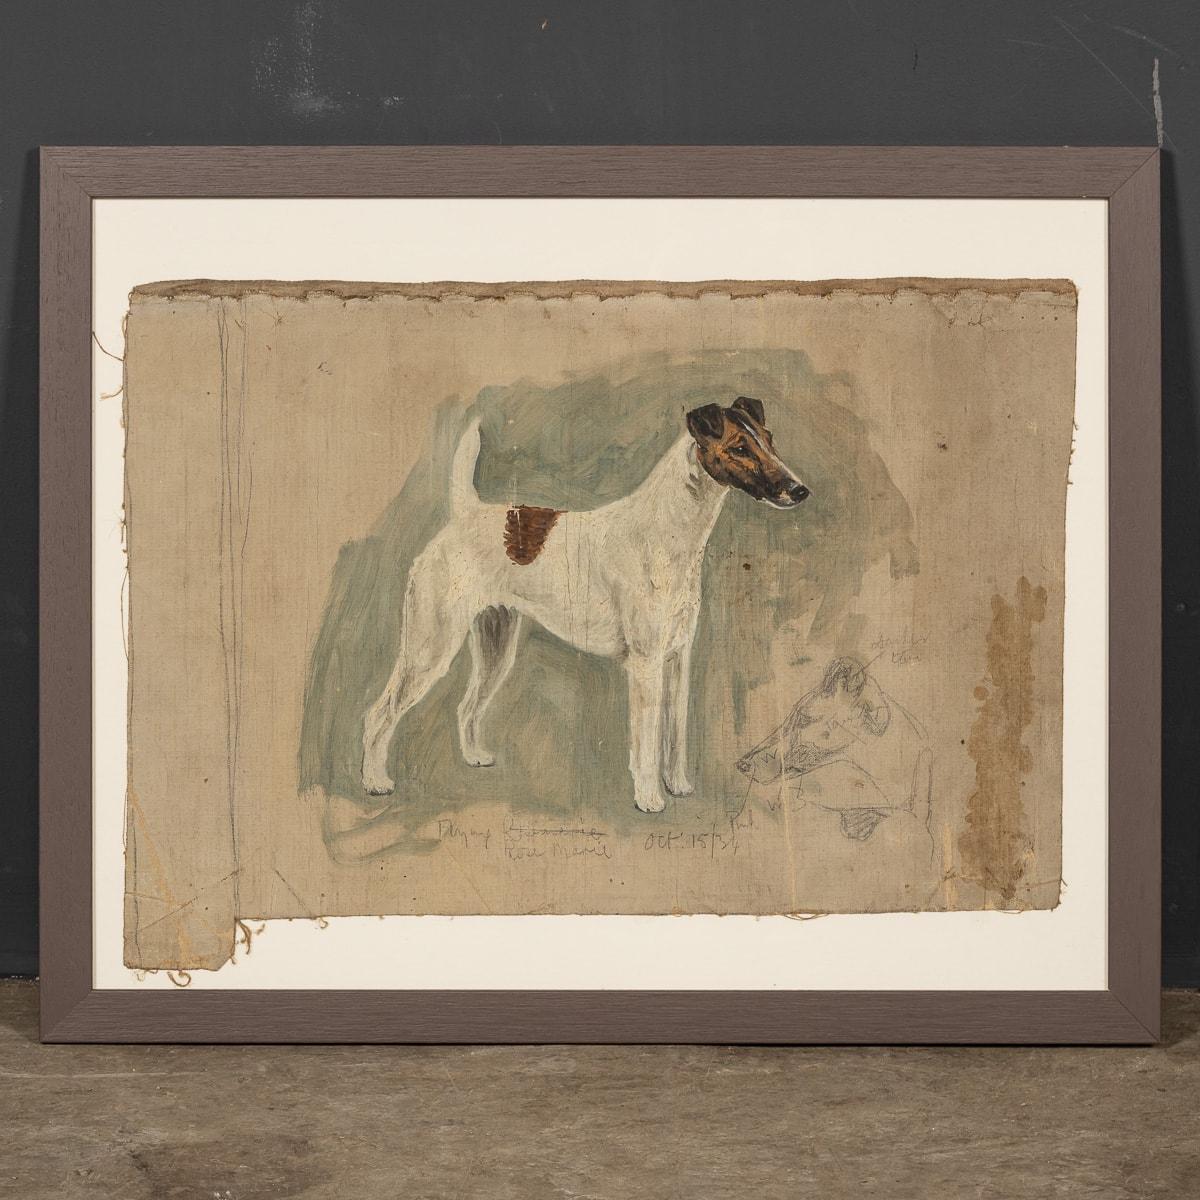 An antique 20th Century oil on canvas piece by Frederick Thomas Daws portraying a Fox Terrier. This framed picture shows sketch work and painting of this champion dog. It is signed F.T. Daws and dated 1934. This rare and distinctive artwork